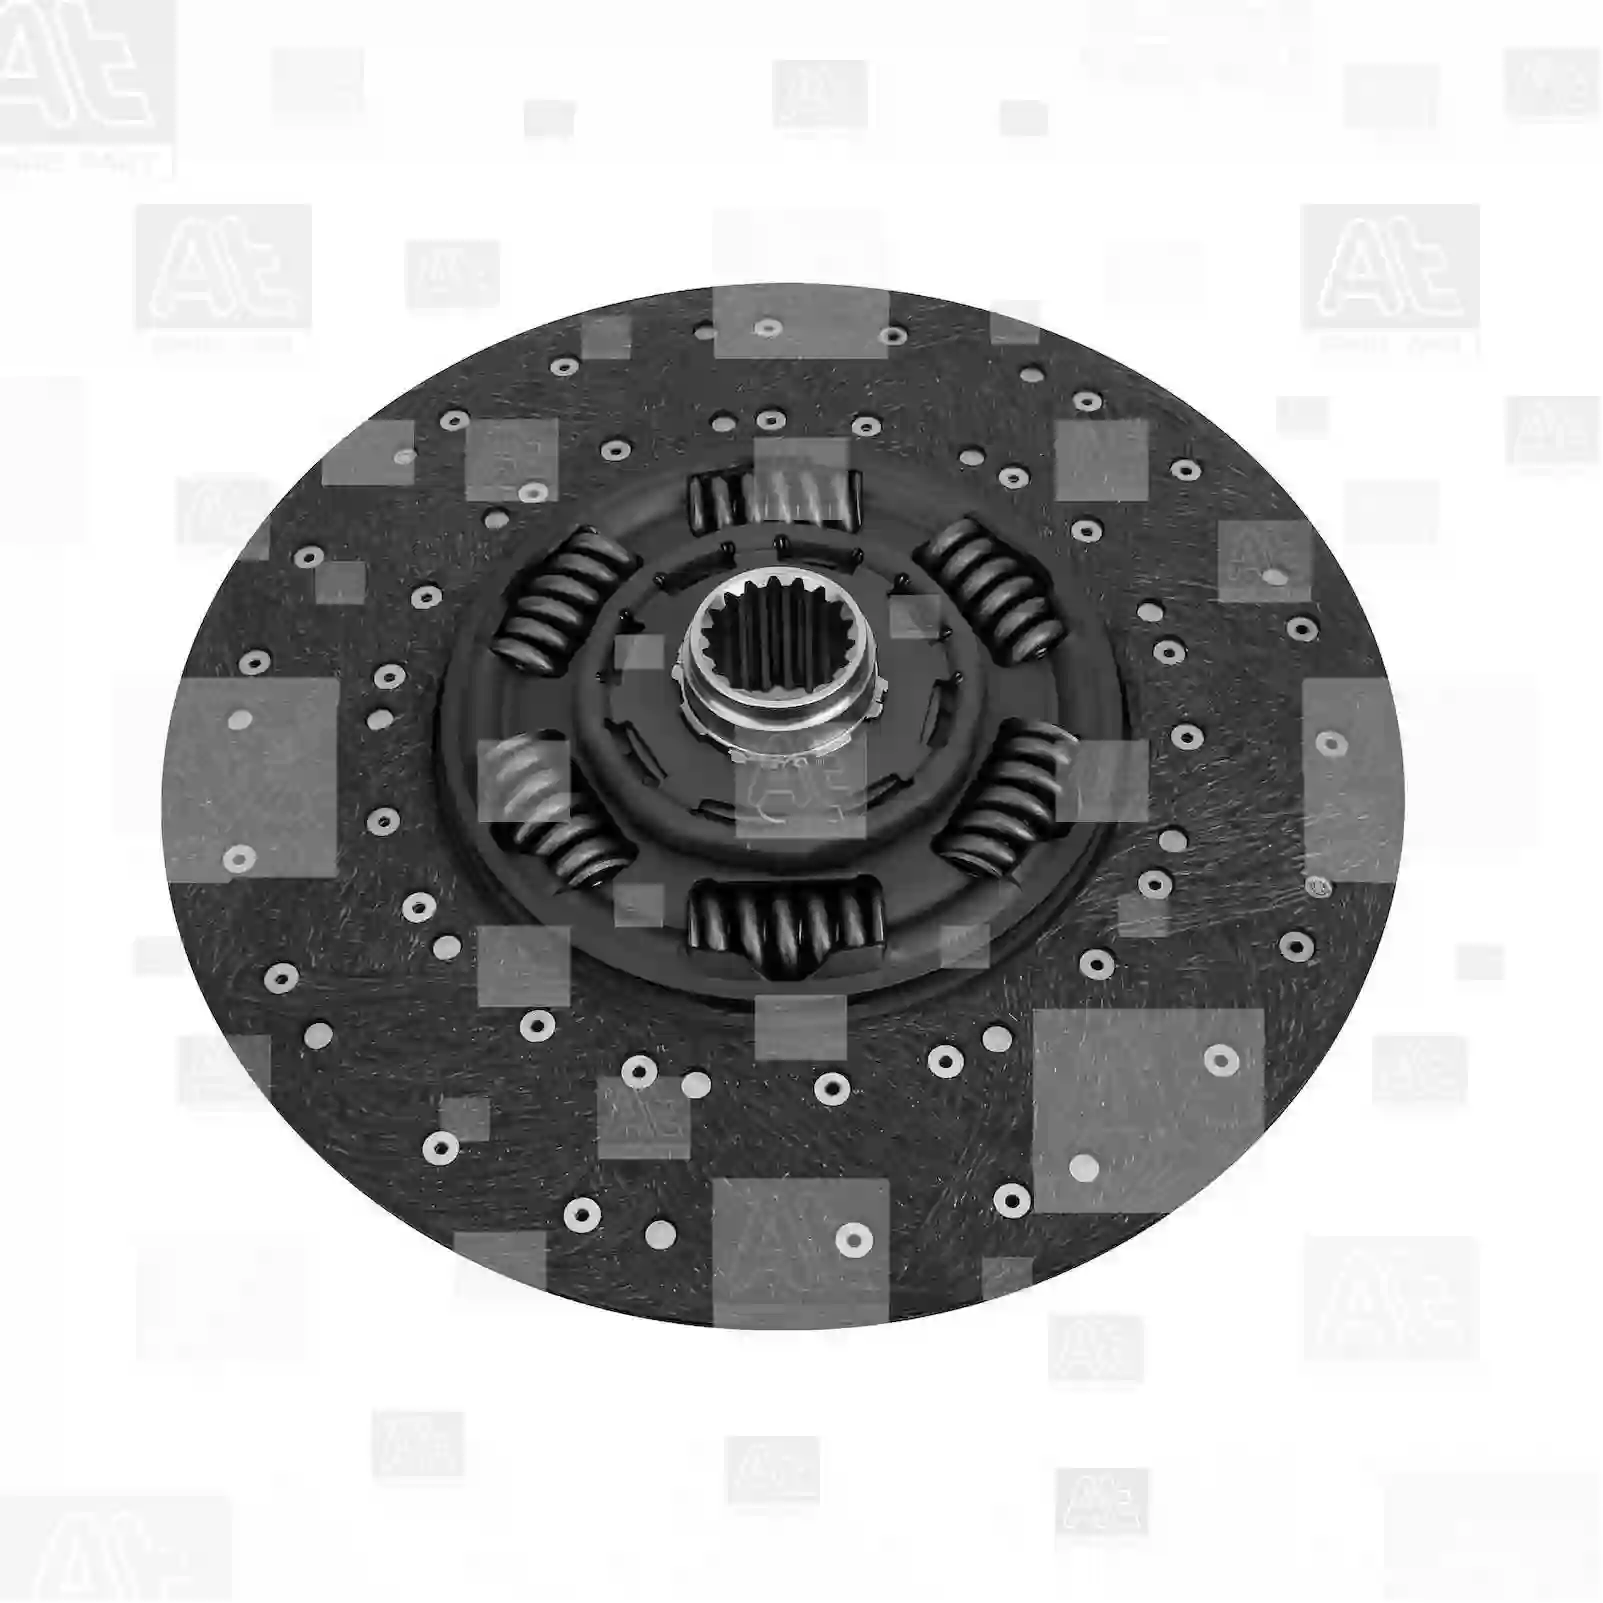 Clutch disc, at no 77722461, oem no: 0152509803, 0152509903, 0162500003, 0162500103, 0162500303, 0162500403, 0162500503, 0172506703, 0172506803, 0172506903, 0192505503, 019250550380, 0192505603, 0192505803, 019250580380, 0192506903, 0202501903, 020250190380, 0202504403, 020250440380, 0202504603, 020250460380, 0202508903, 020250890380, 0212503703, 0212503803, 0212508903, 0212509303, 0252504603, 0252504703, 0262501103, 0262501203 At Spare Part | Engine, Accelerator Pedal, Camshaft, Connecting Rod, Crankcase, Crankshaft, Cylinder Head, Engine Suspension Mountings, Exhaust Manifold, Exhaust Gas Recirculation, Filter Kits, Flywheel Housing, General Overhaul Kits, Engine, Intake Manifold, Oil Cleaner, Oil Cooler, Oil Filter, Oil Pump, Oil Sump, Piston & Liner, Sensor & Switch, Timing Case, Turbocharger, Cooling System, Belt Tensioner, Coolant Filter, Coolant Pipe, Corrosion Prevention Agent, Drive, Expansion Tank, Fan, Intercooler, Monitors & Gauges, Radiator, Thermostat, V-Belt / Timing belt, Water Pump, Fuel System, Electronical Injector Unit, Feed Pump, Fuel Filter, cpl., Fuel Gauge Sender,  Fuel Line, Fuel Pump, Fuel Tank, Injection Line Kit, Injection Pump, Exhaust System, Clutch & Pedal, Gearbox, Propeller Shaft, Axles, Brake System, Hubs & Wheels, Suspension, Leaf Spring, Universal Parts / Accessories, Steering, Electrical System, Cabin Clutch disc, at no 77722461, oem no: 0152509803, 0152509903, 0162500003, 0162500103, 0162500303, 0162500403, 0162500503, 0172506703, 0172506803, 0172506903, 0192505503, 019250550380, 0192505603, 0192505803, 019250580380, 0192506903, 0202501903, 020250190380, 0202504403, 020250440380, 0202504603, 020250460380, 0202508903, 020250890380, 0212503703, 0212503803, 0212508903, 0212509303, 0252504603, 0252504703, 0262501103, 0262501203 At Spare Part | Engine, Accelerator Pedal, Camshaft, Connecting Rod, Crankcase, Crankshaft, Cylinder Head, Engine Suspension Mountings, Exhaust Manifold, Exhaust Gas Recirculation, Filter Kits, Flywheel Housing, General Overhaul Kits, Engine, Intake Manifold, Oil Cleaner, Oil Cooler, Oil Filter, Oil Pump, Oil Sump, Piston & Liner, Sensor & Switch, Timing Case, Turbocharger, Cooling System, Belt Tensioner, Coolant Filter, Coolant Pipe, Corrosion Prevention Agent, Drive, Expansion Tank, Fan, Intercooler, Monitors & Gauges, Radiator, Thermostat, V-Belt / Timing belt, Water Pump, Fuel System, Electronical Injector Unit, Feed Pump, Fuel Filter, cpl., Fuel Gauge Sender,  Fuel Line, Fuel Pump, Fuel Tank, Injection Line Kit, Injection Pump, Exhaust System, Clutch & Pedal, Gearbox, Propeller Shaft, Axles, Brake System, Hubs & Wheels, Suspension, Leaf Spring, Universal Parts / Accessories, Steering, Electrical System, Cabin